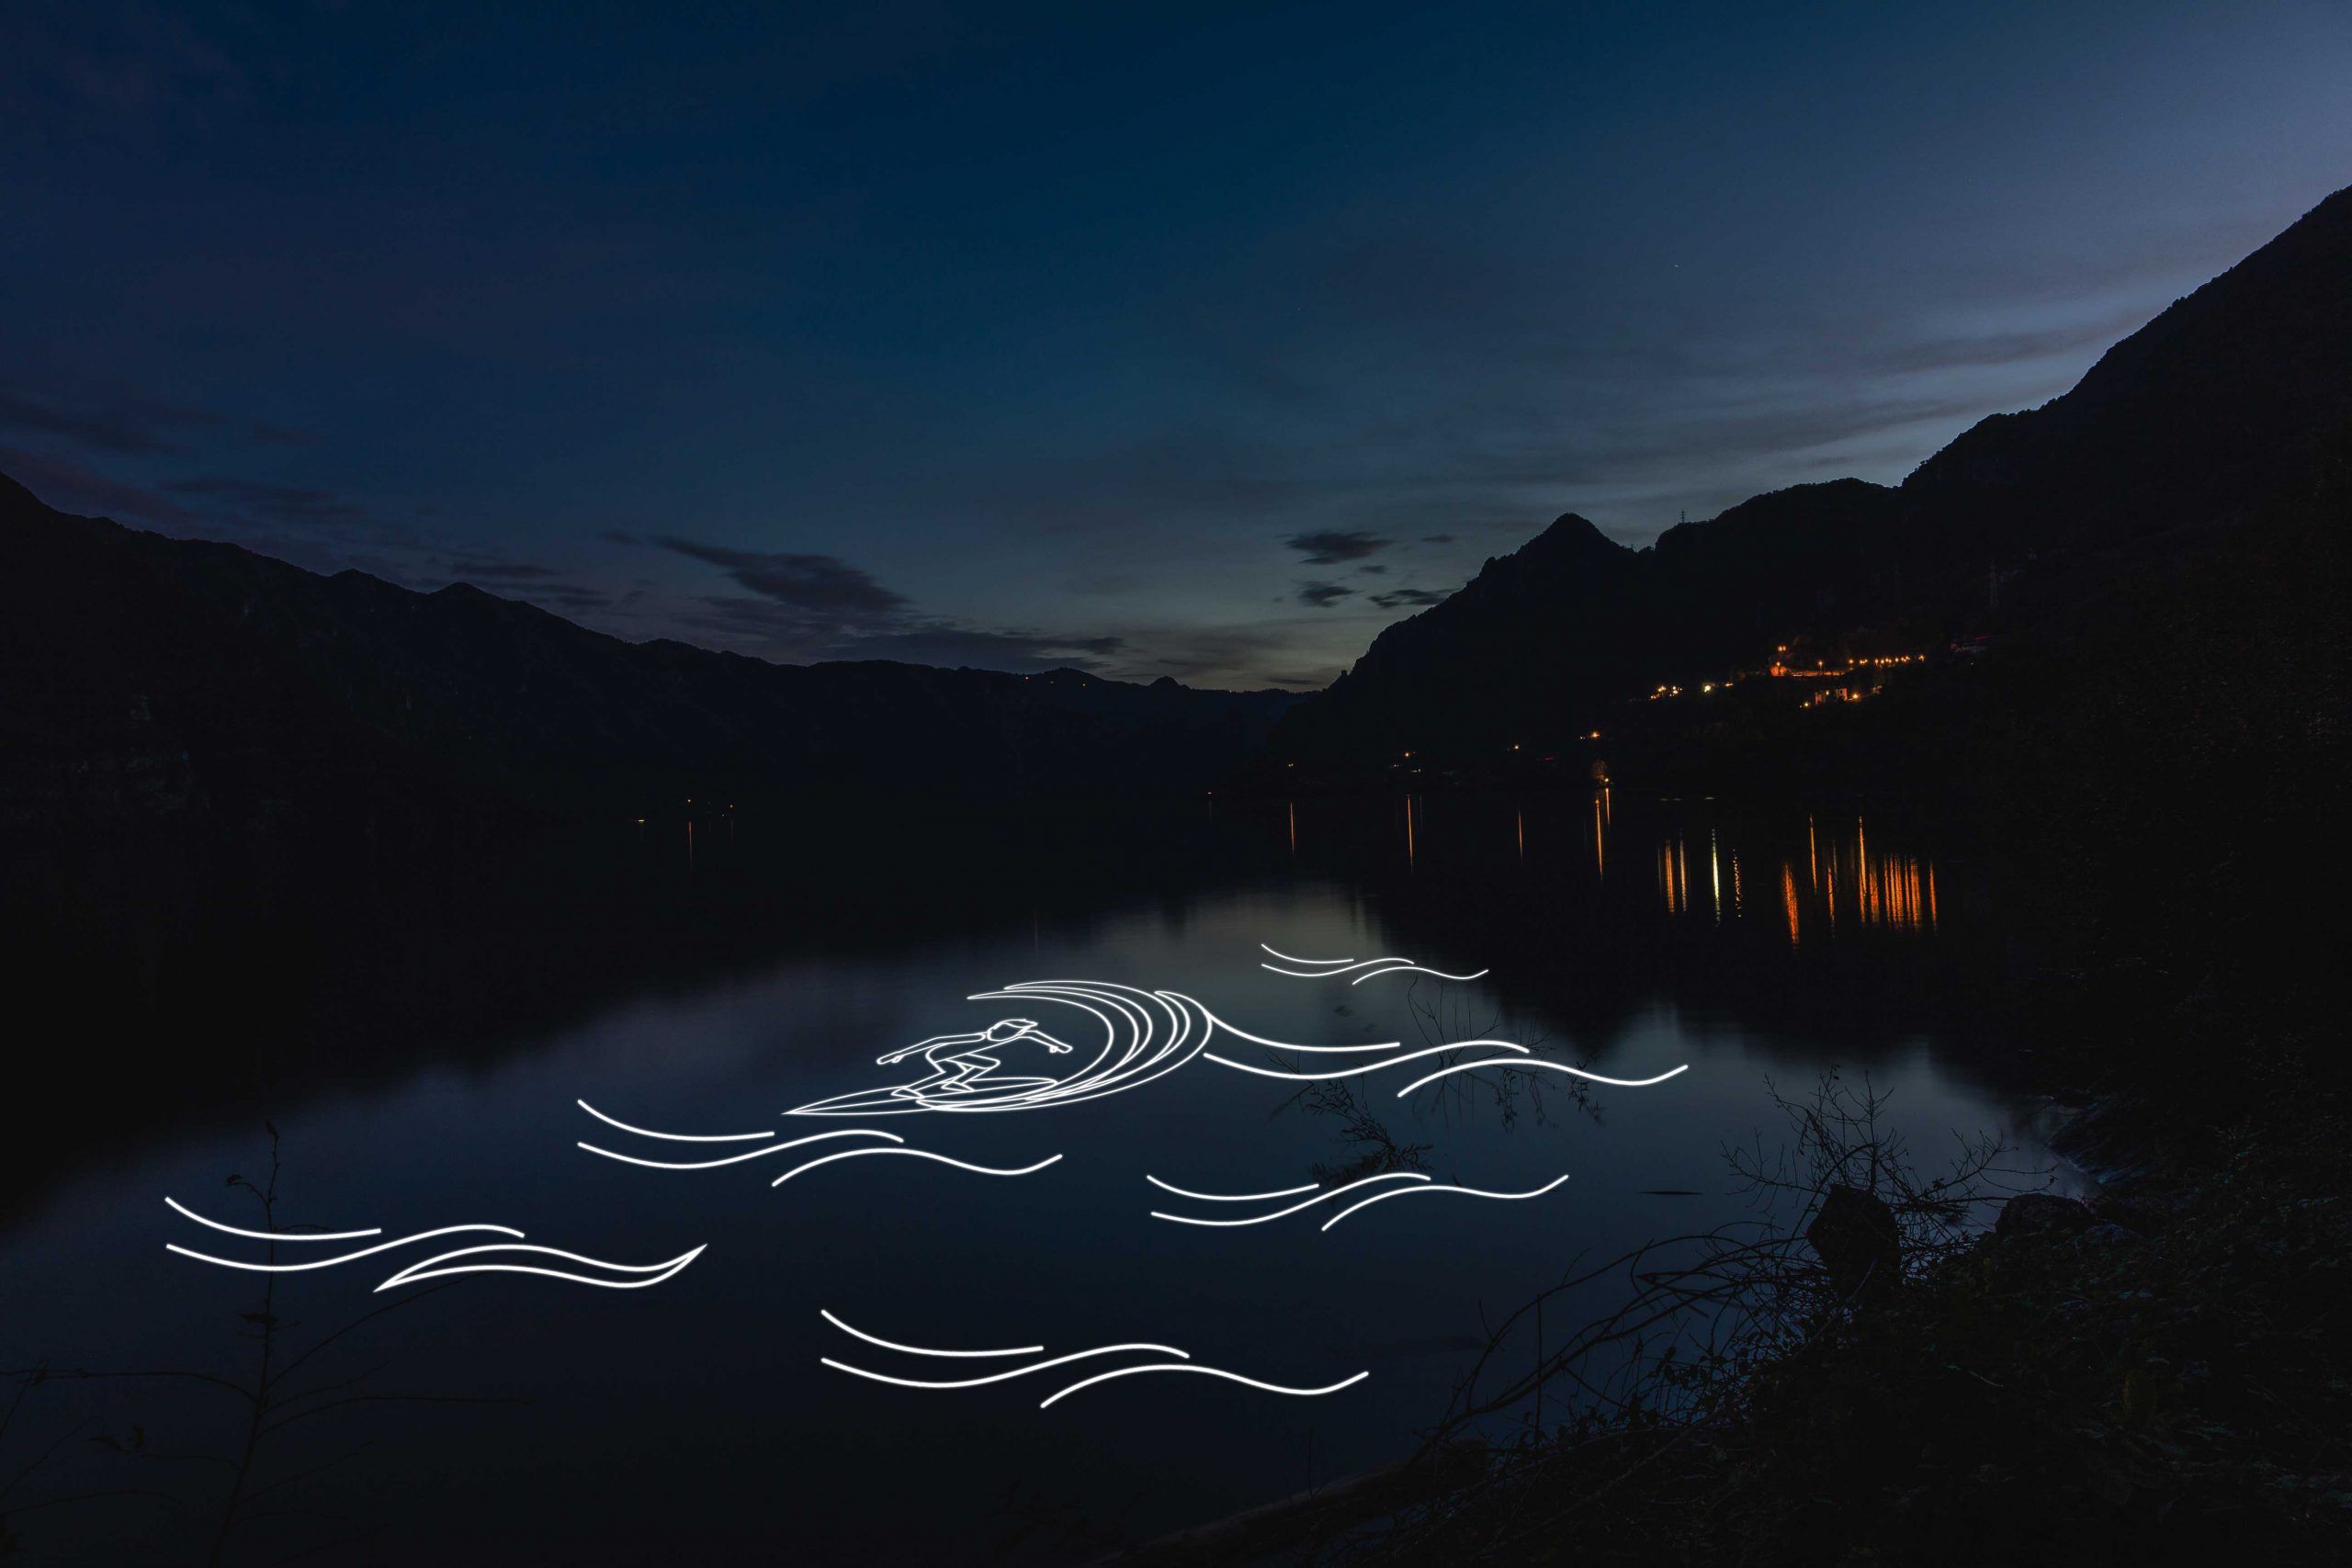 Europe Évènement - Photo of a lake with laser projection of wave shapes and surfer on it